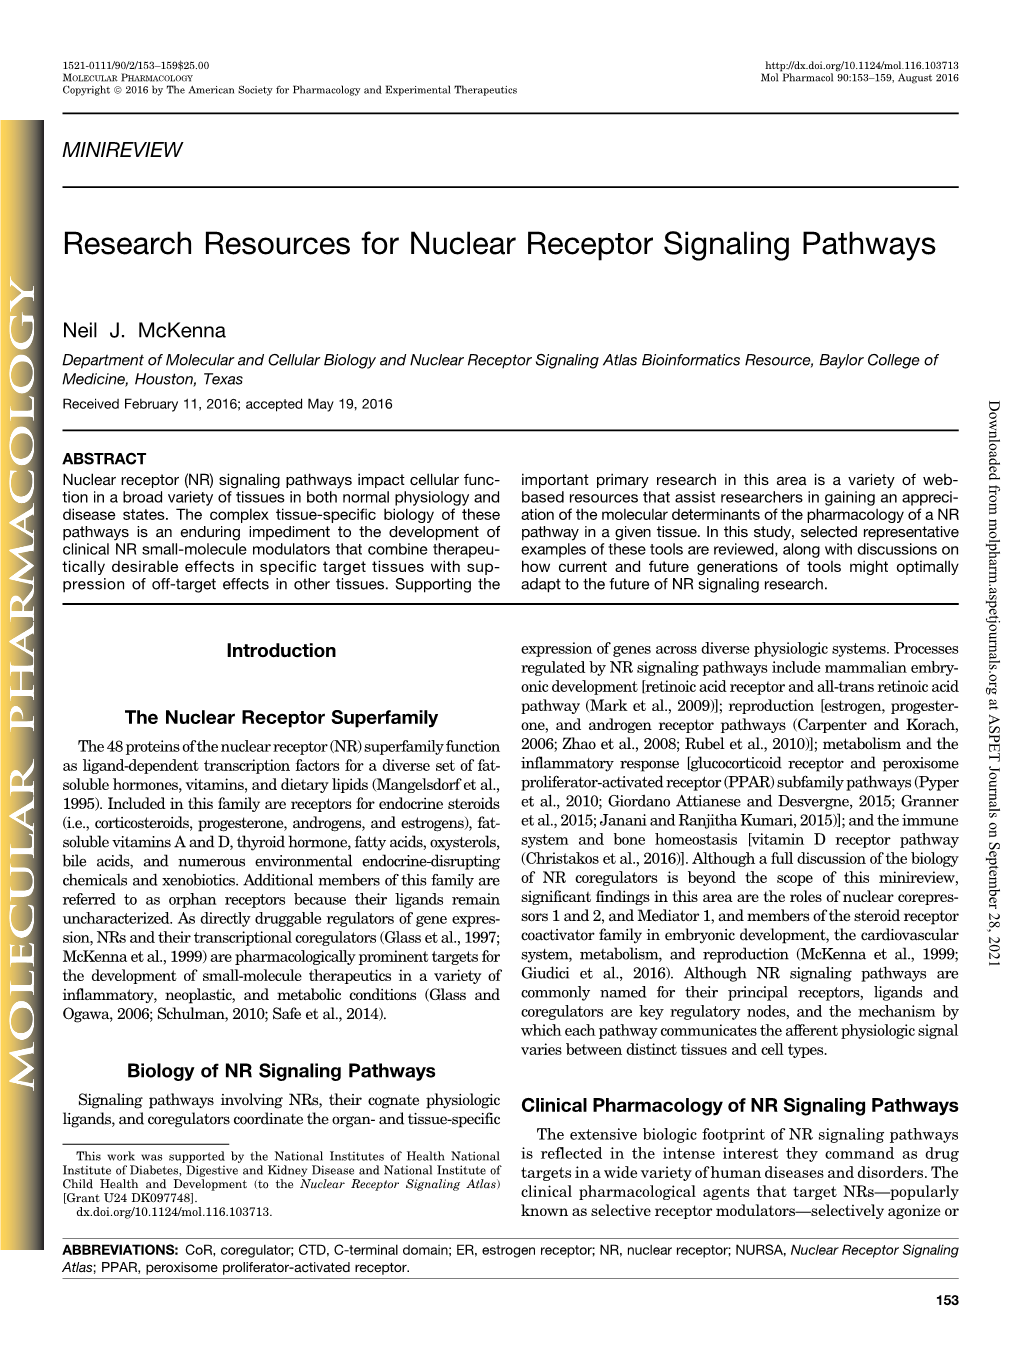 Research Resources for Nuclear Receptor Signaling Pathways